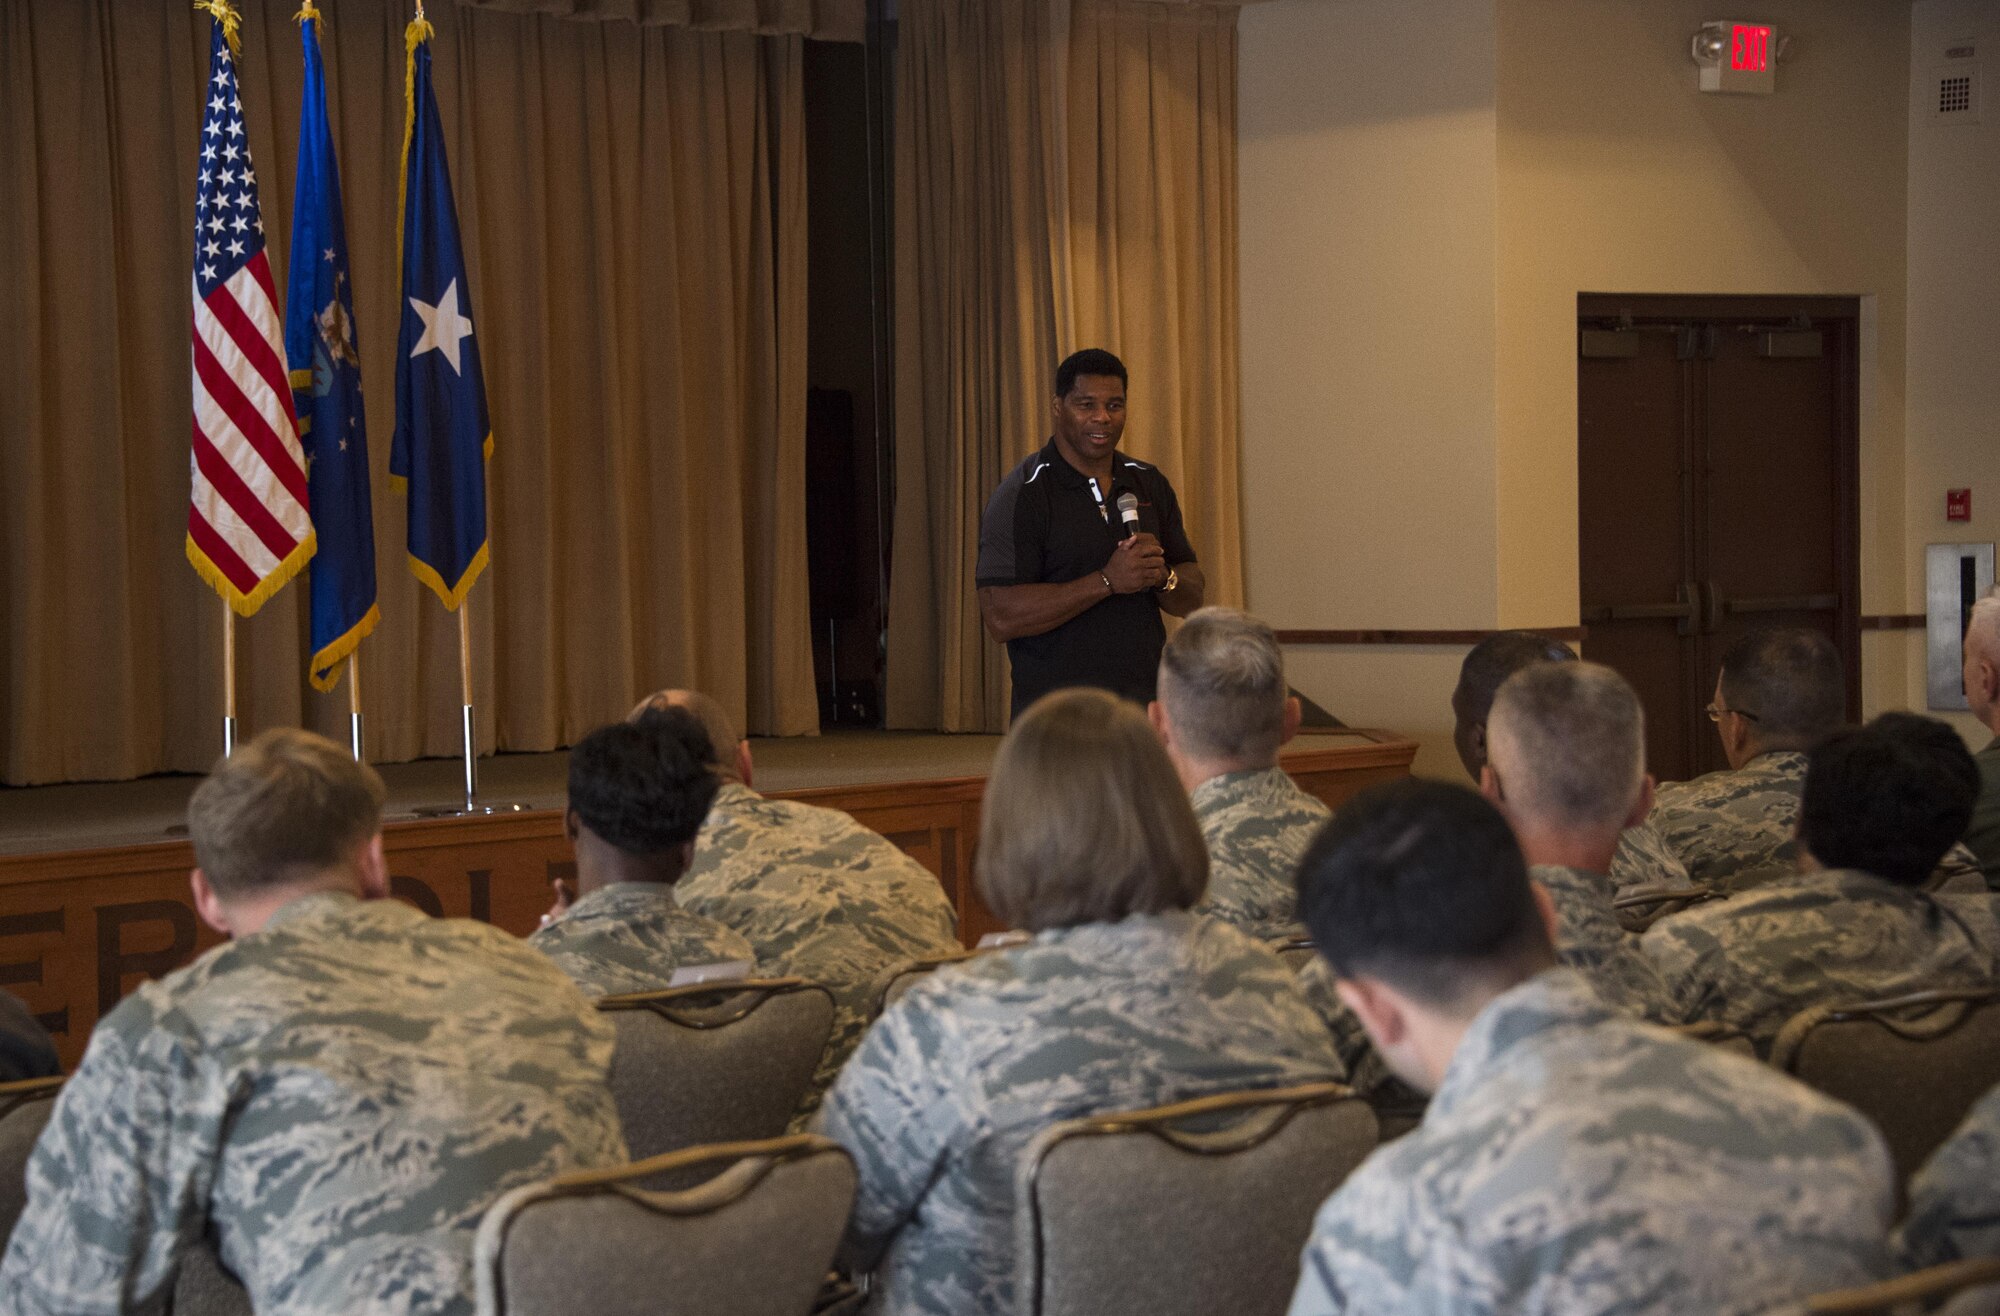 Herschel Walker, former professional athlete, speaks to Thunderbolts during his visit to Luke Air Force Base, Ariz., Oct. 3, 2017. Walker’s speech encouraged Airmen to be resilient and never give up even through life’s toughest times. (U.S. Air Force photo/Airman 1st Class Alexander Cook)